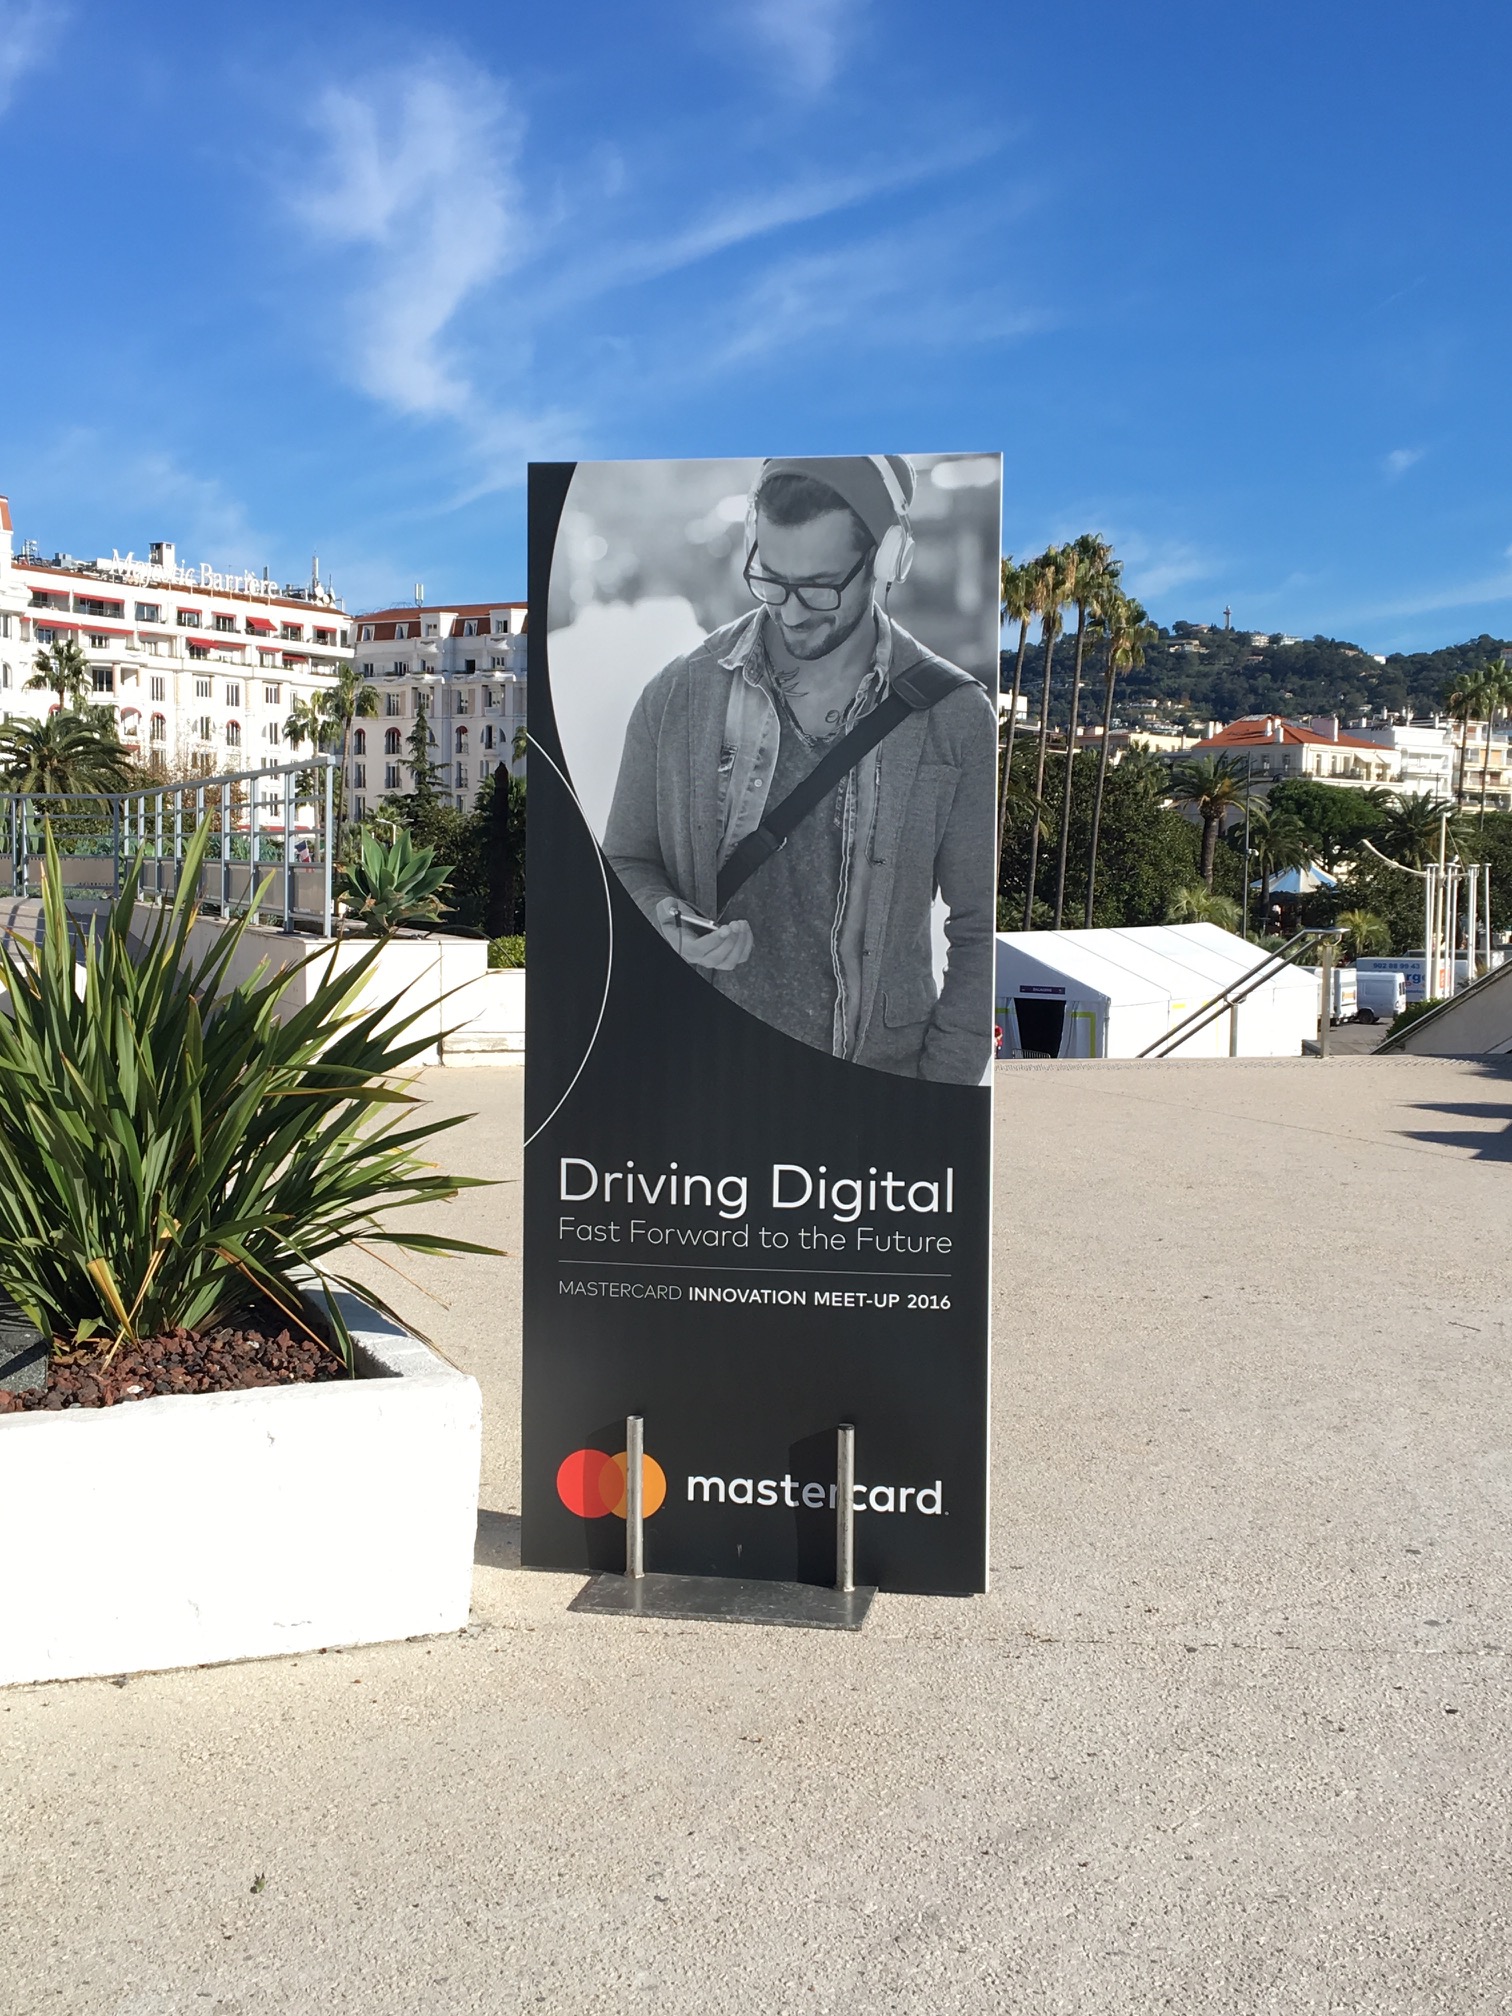 mastercard-trustech-cannes-2016-2